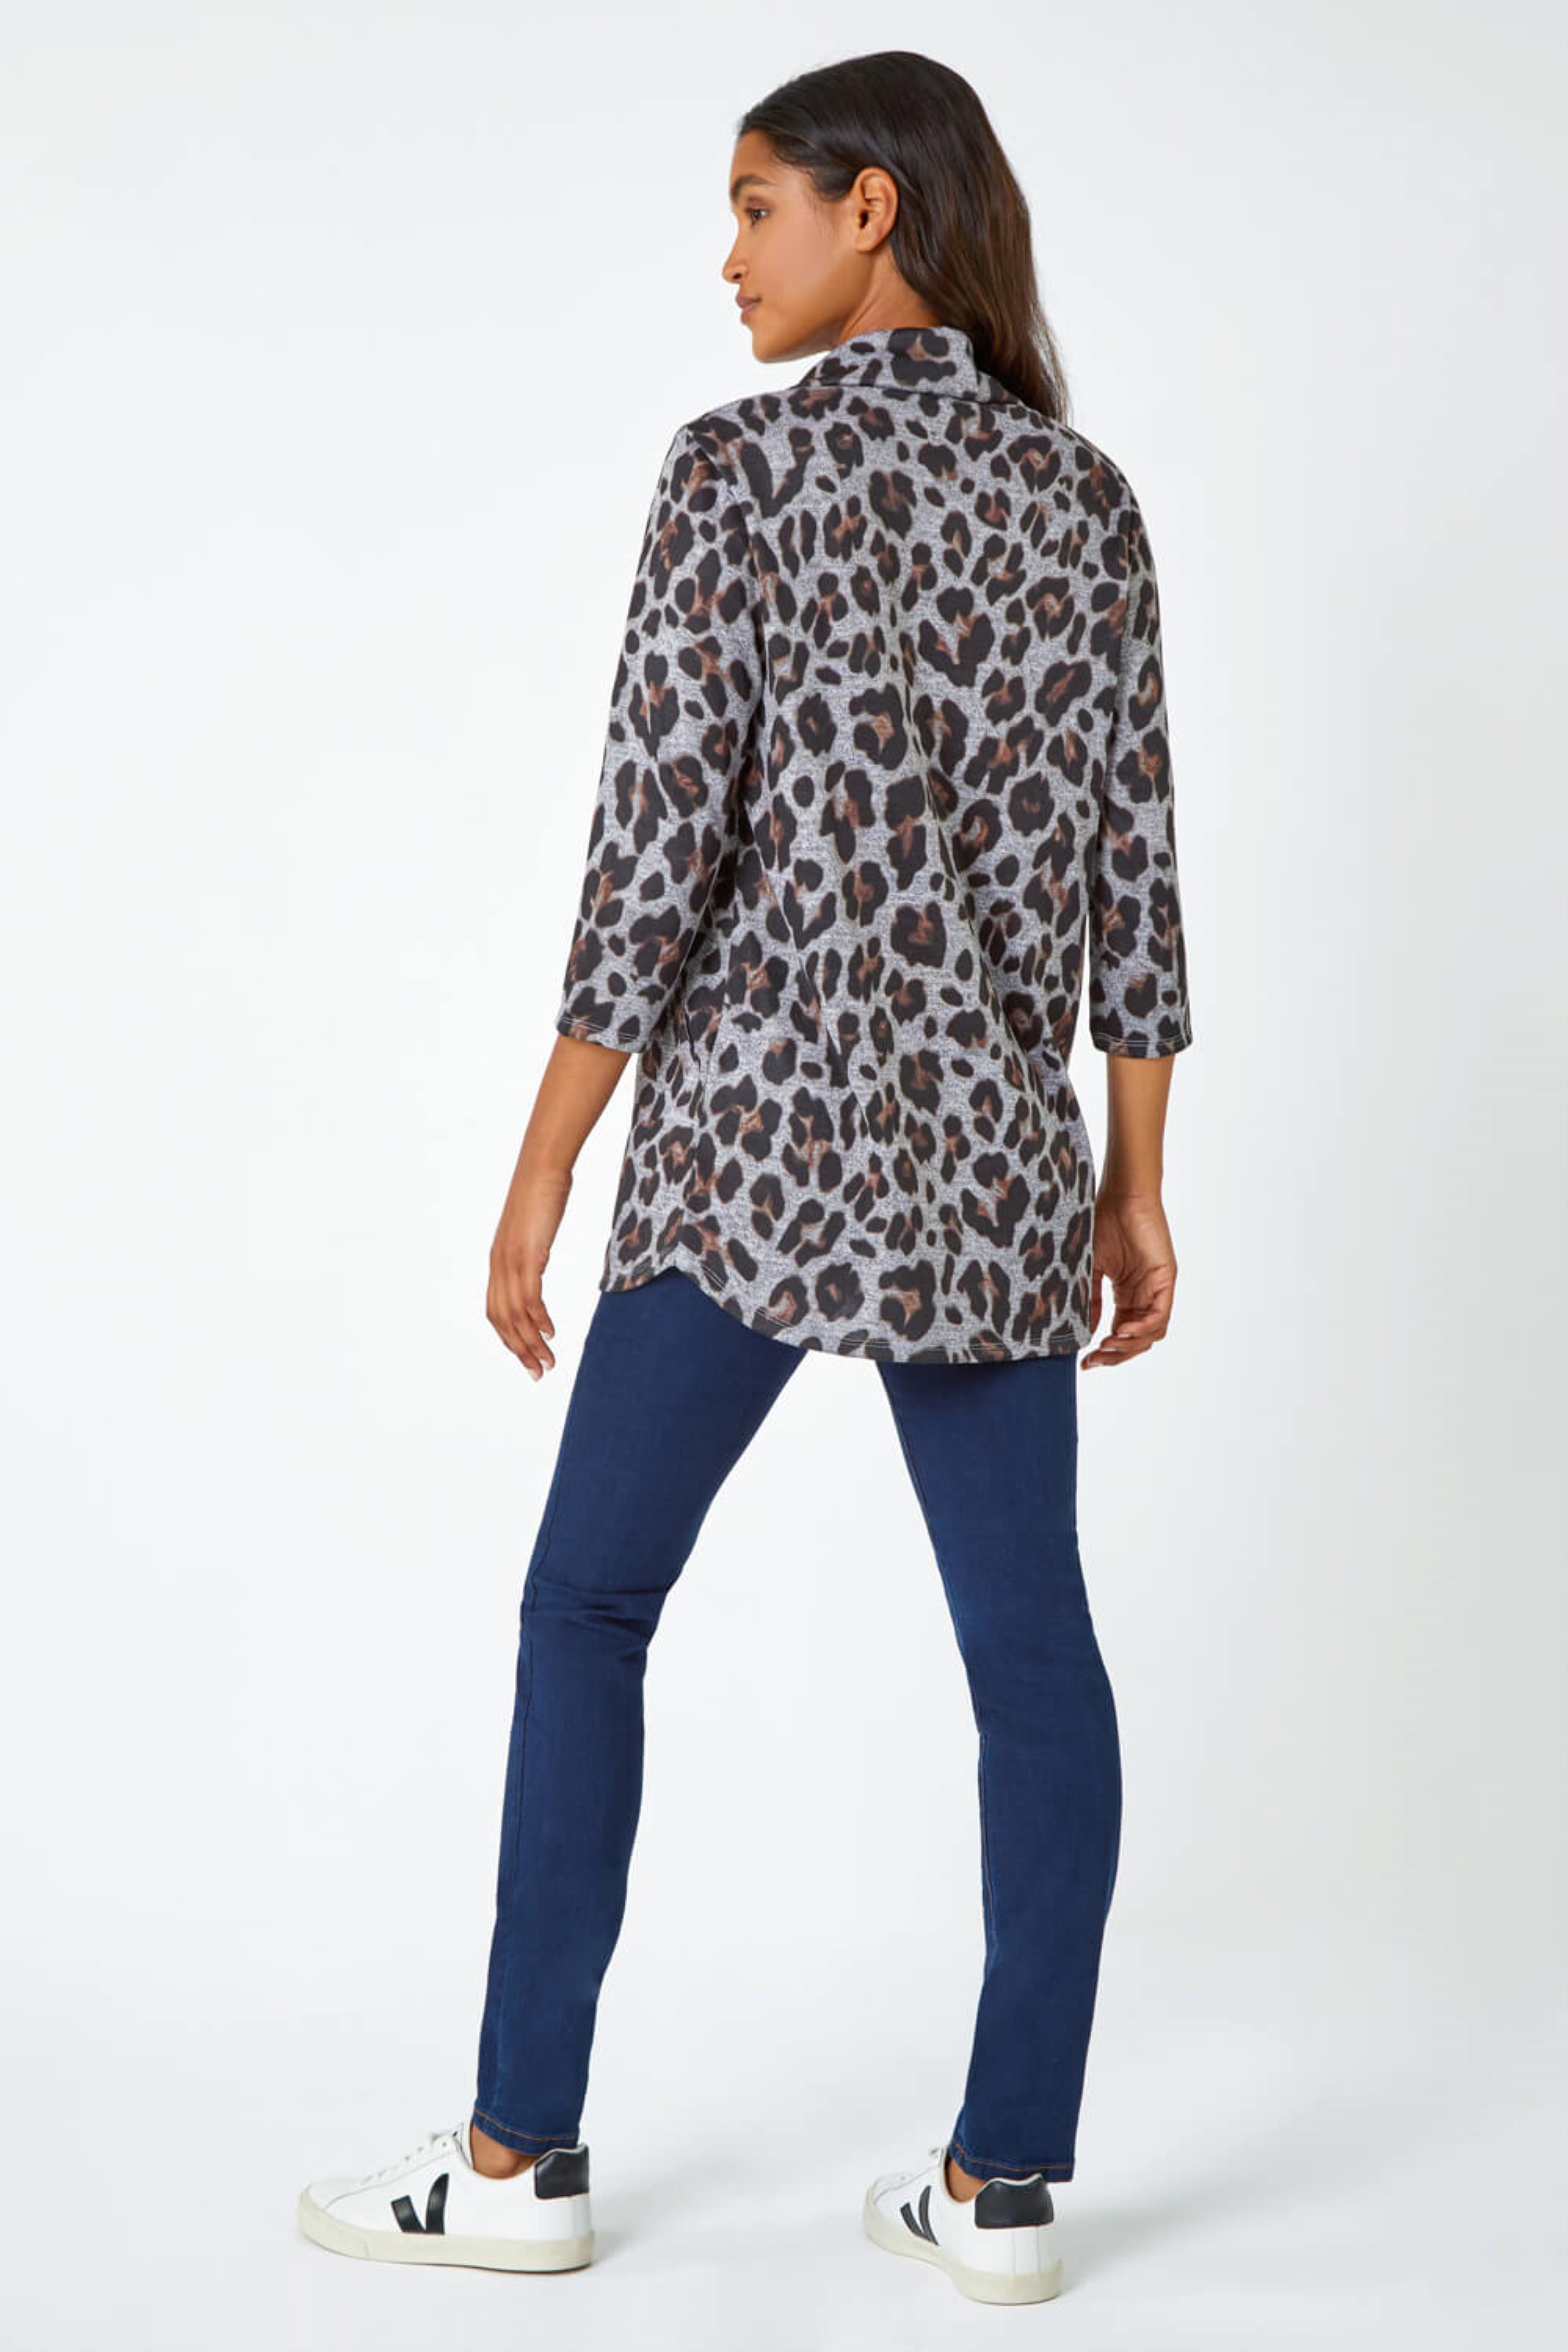 Neutral Animal Print Pocket Top with Snood, Image 3 of 5